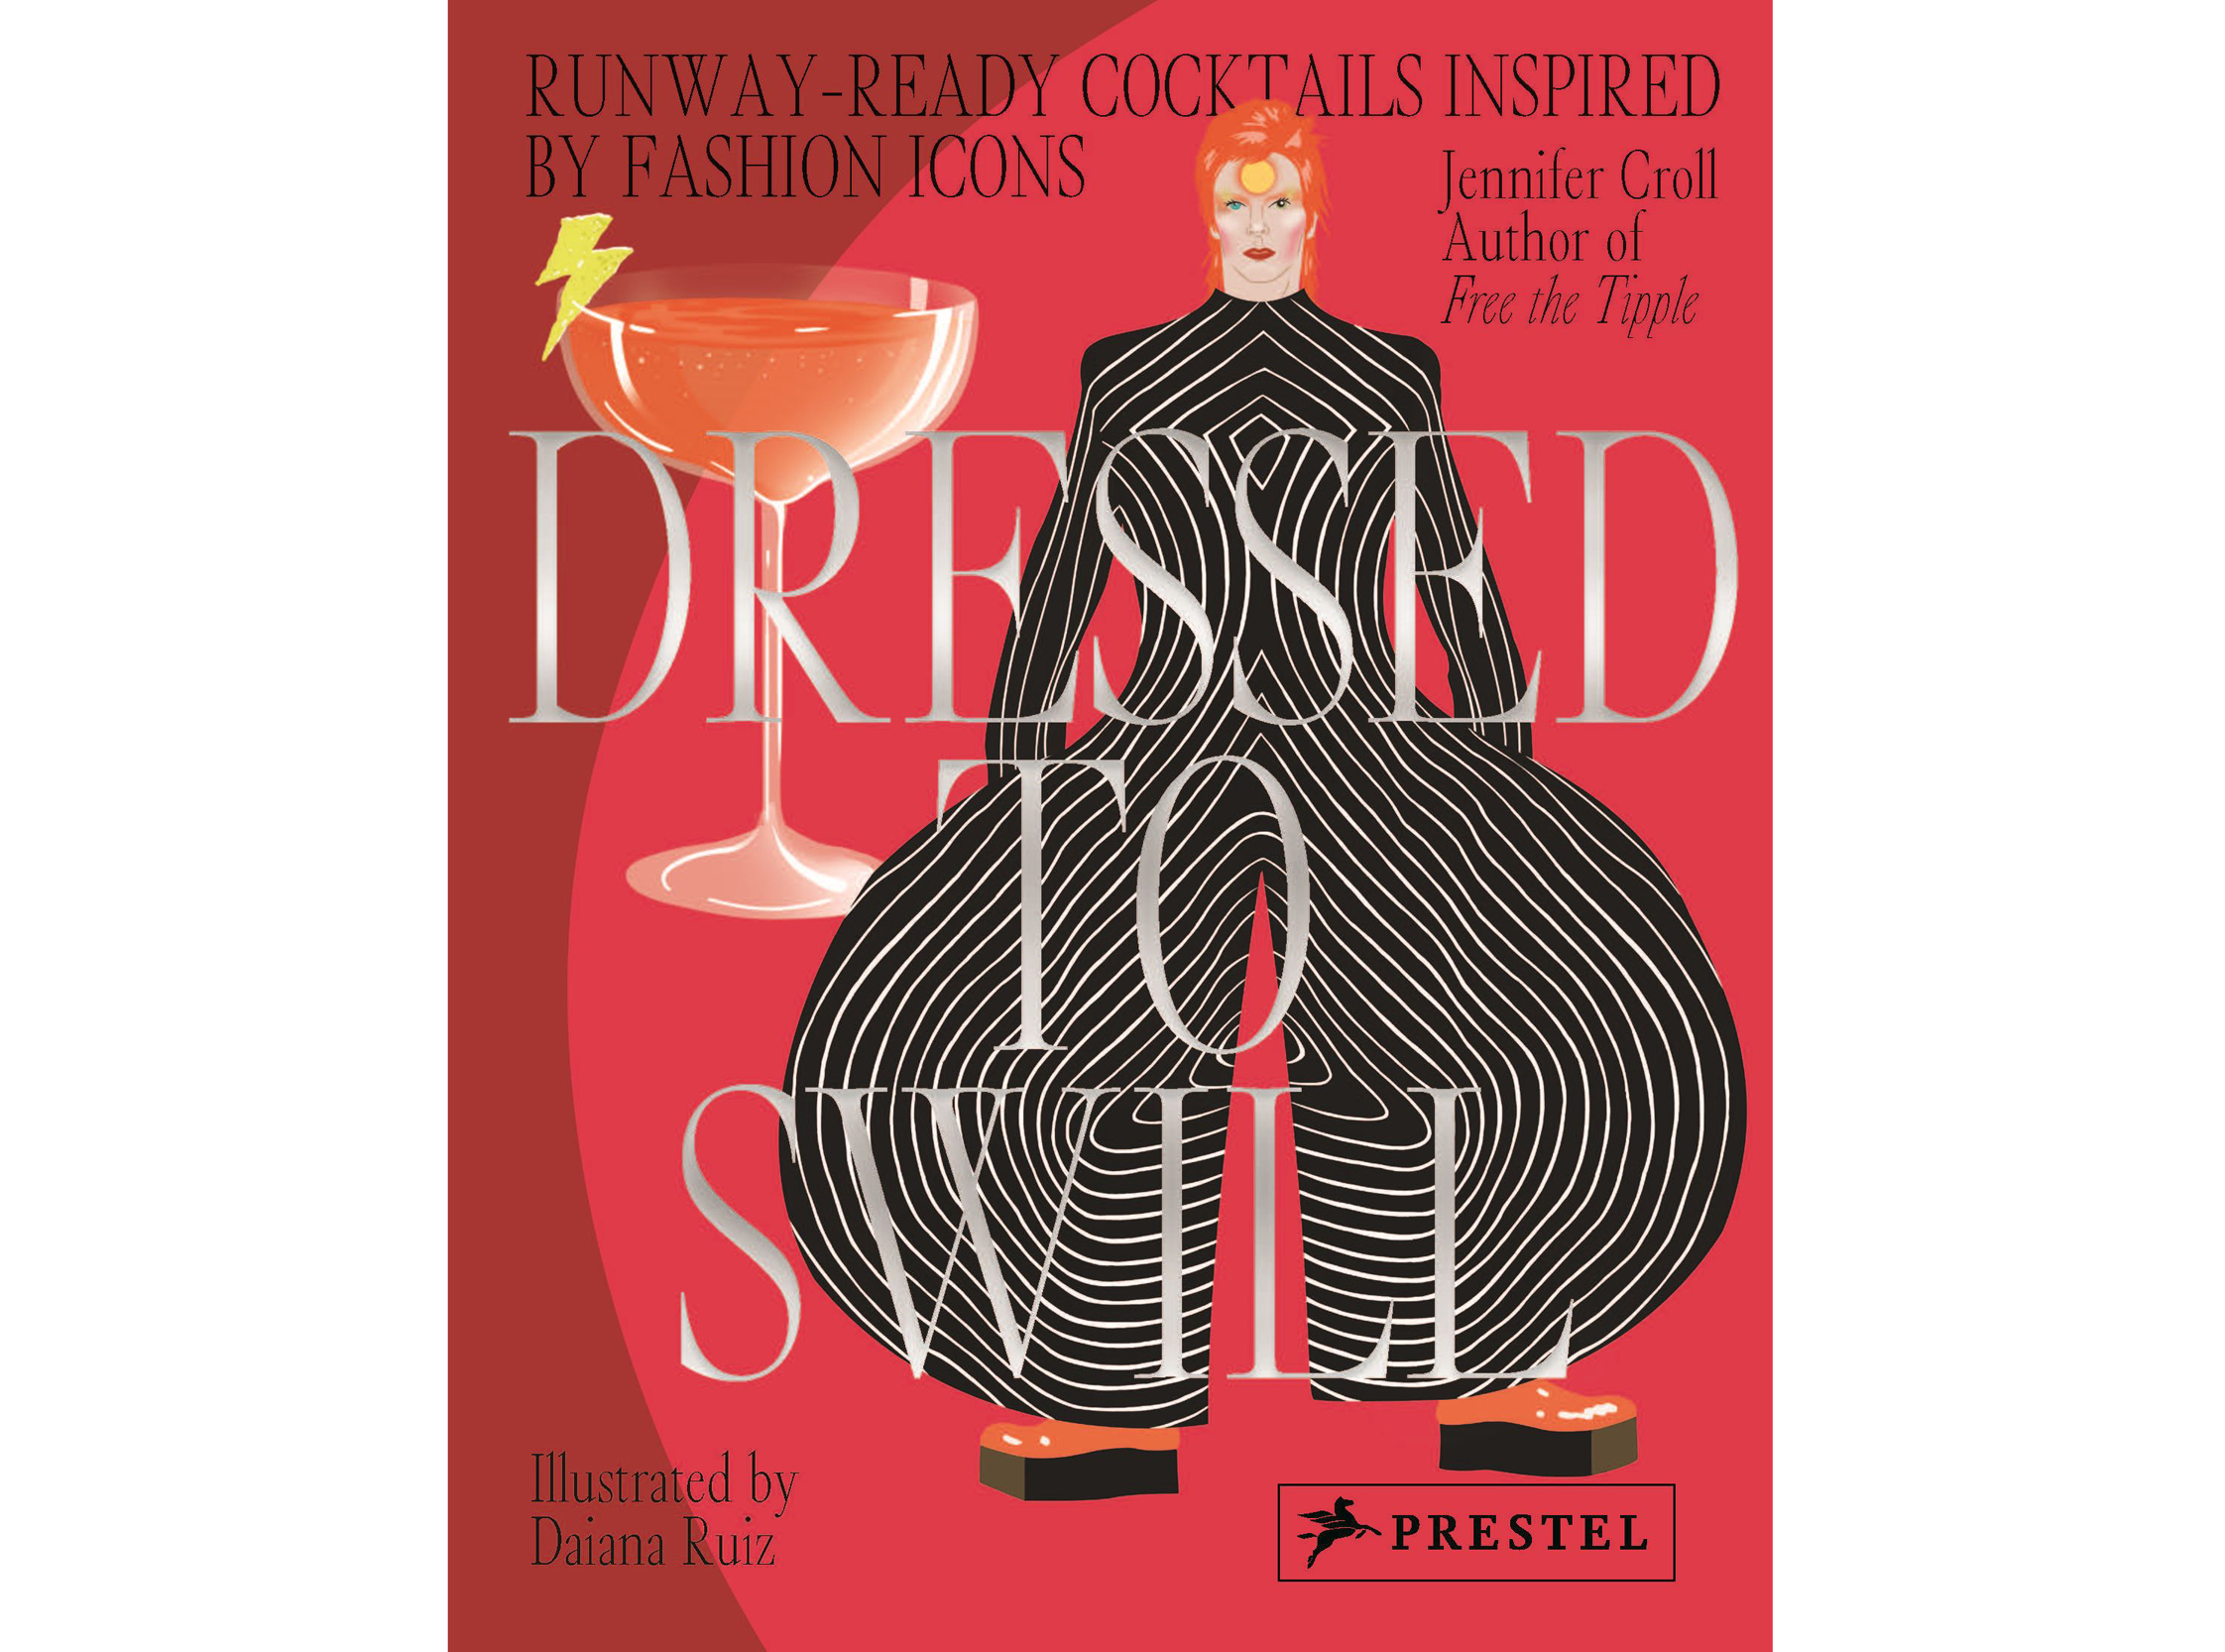 Dressed to Swill: Runway-Ready Cocktails inspired by Fashion Icons, by Jennifer Croll, illustrations by Daiana Ruiz